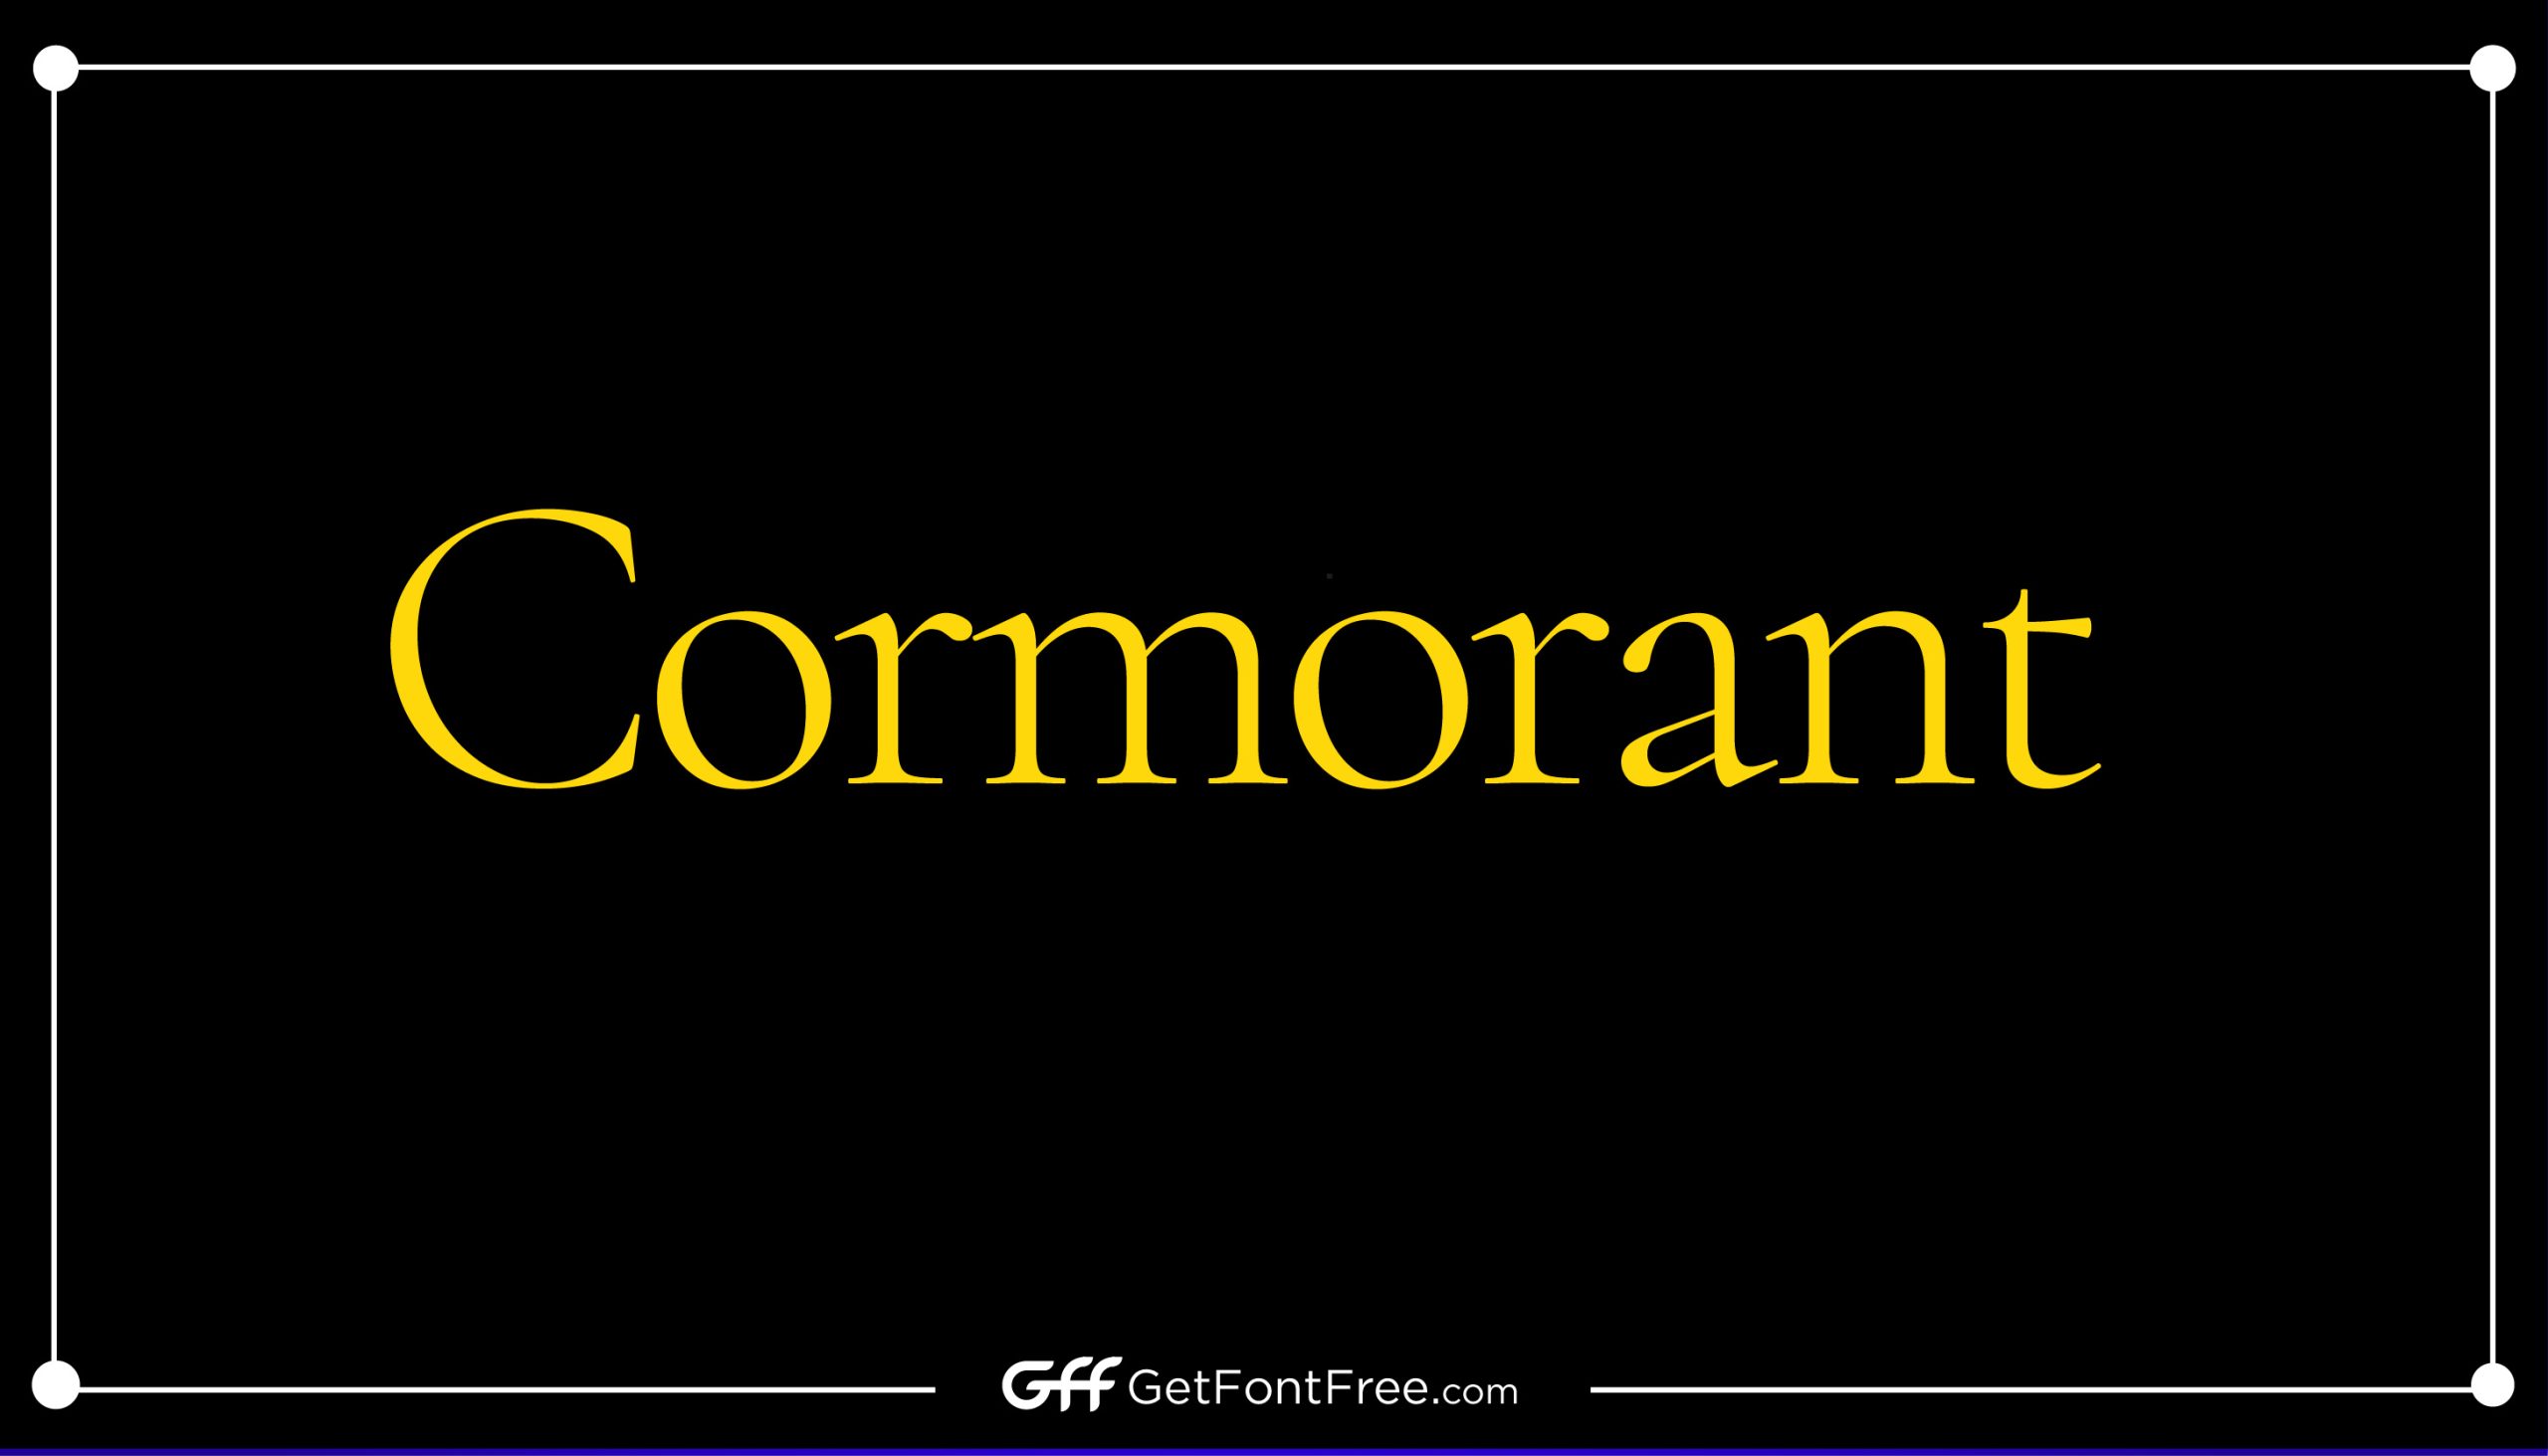 Cormorant Font is a typeface family that was designed by Christian Thalmann in 2015. It is a serif font that draws inspiration from classic old-style typefaces such as Garamond and Caslon. Cormorant is known for its elegant and refined appearance, making it a popular choice for a wide variety of design projects. In addition to its regular weight, Cormorant also includes several other styles, including italics, bold, and small caps, making it a versatile font for designers. The font is free to use and is available for download from various sources online.